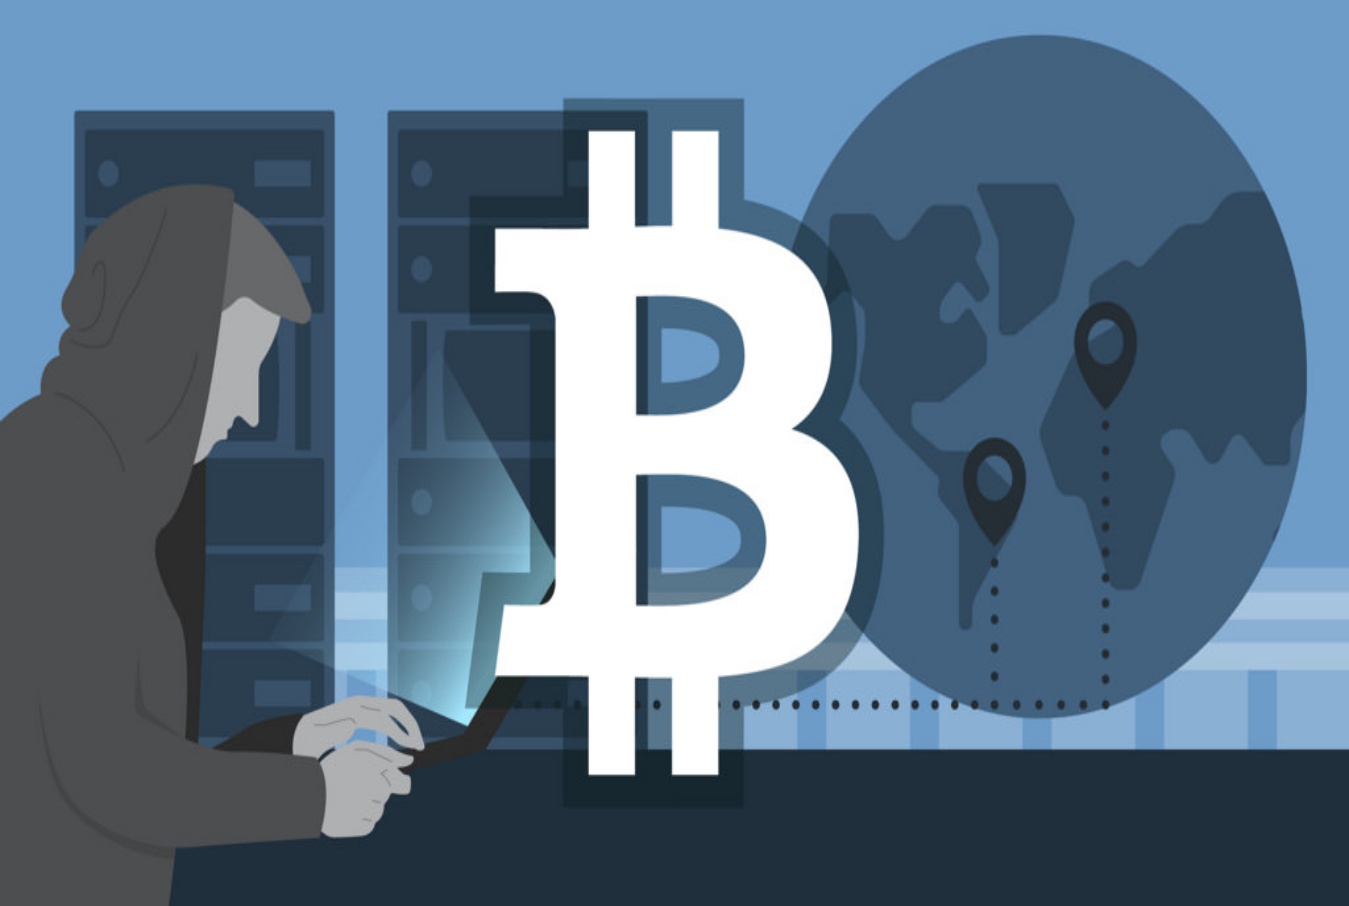 Hackers steal Bitcoin worth $750,000 by hacking Electrum wallets